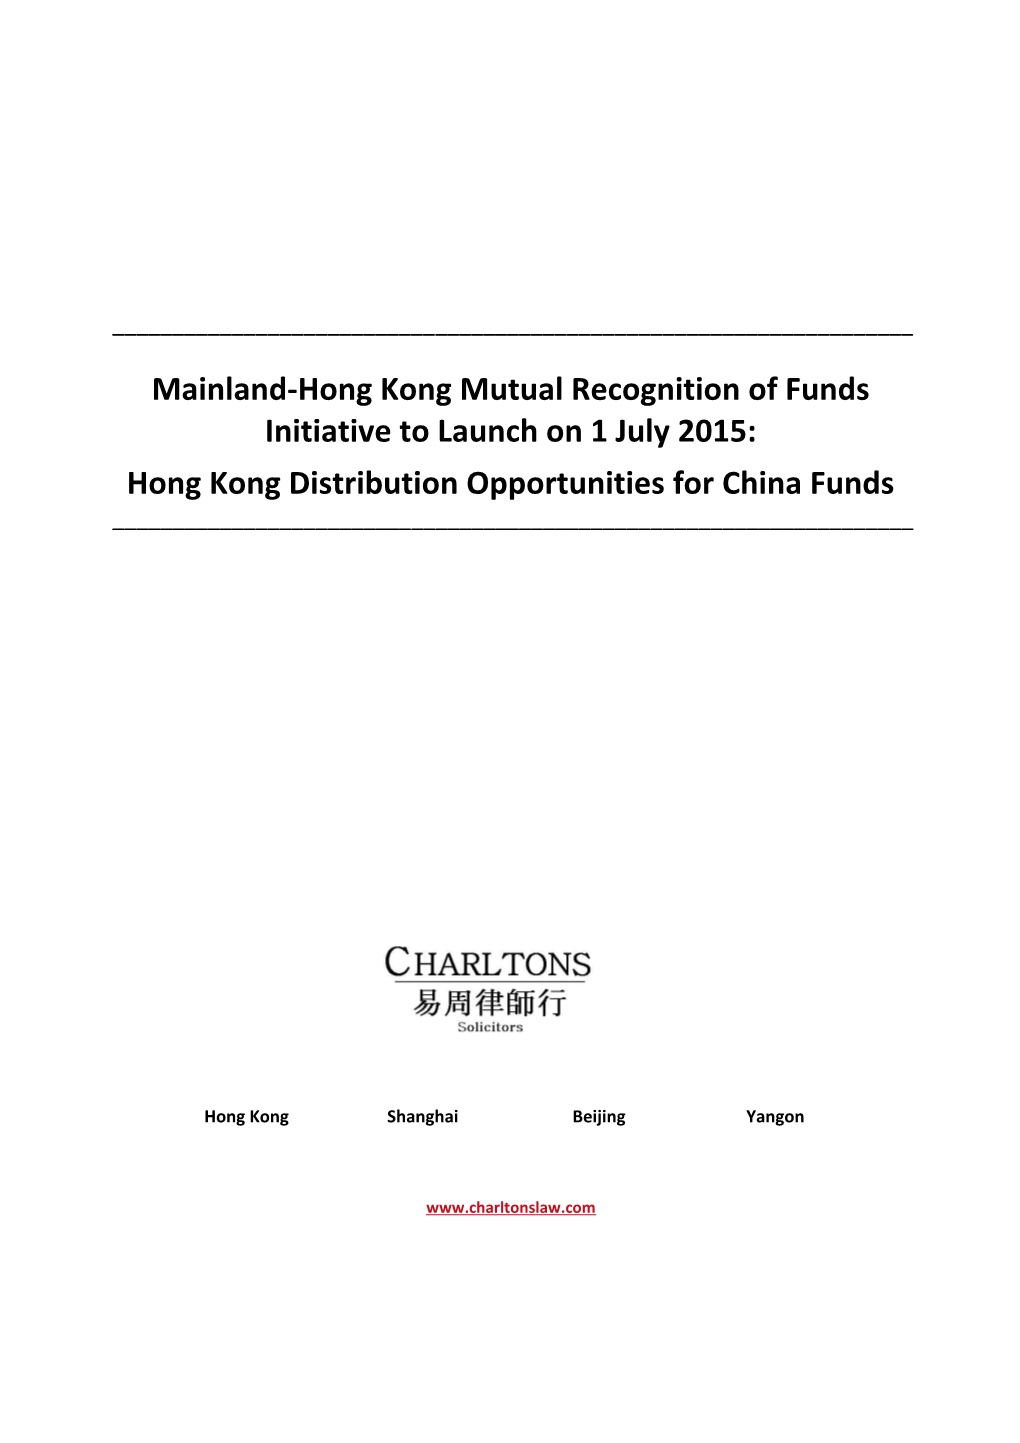 Hong Kong Distribution Opportunities for China Funds